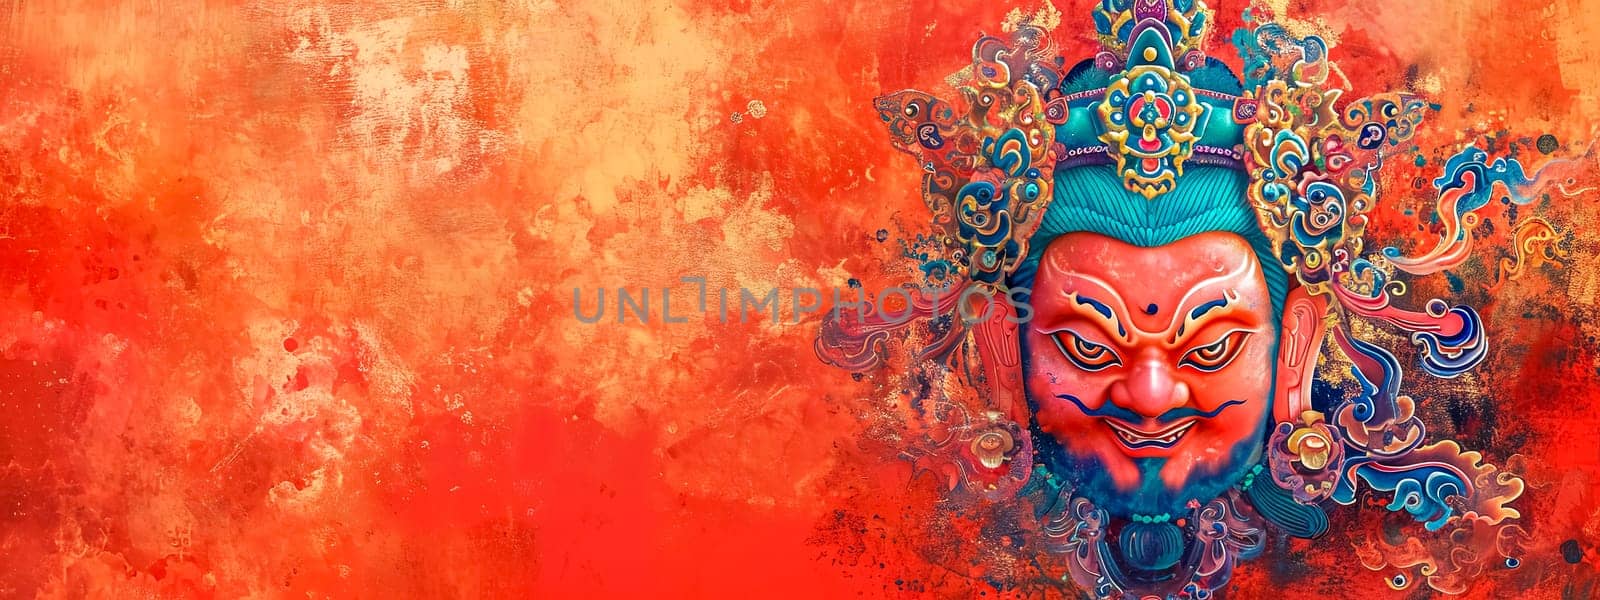 Tibetan mask depicted in vibrant colors, set against a fiery red and orange textured background. The mask is ornate with intricate patterns and details, symbolizing traditional cultural heritage